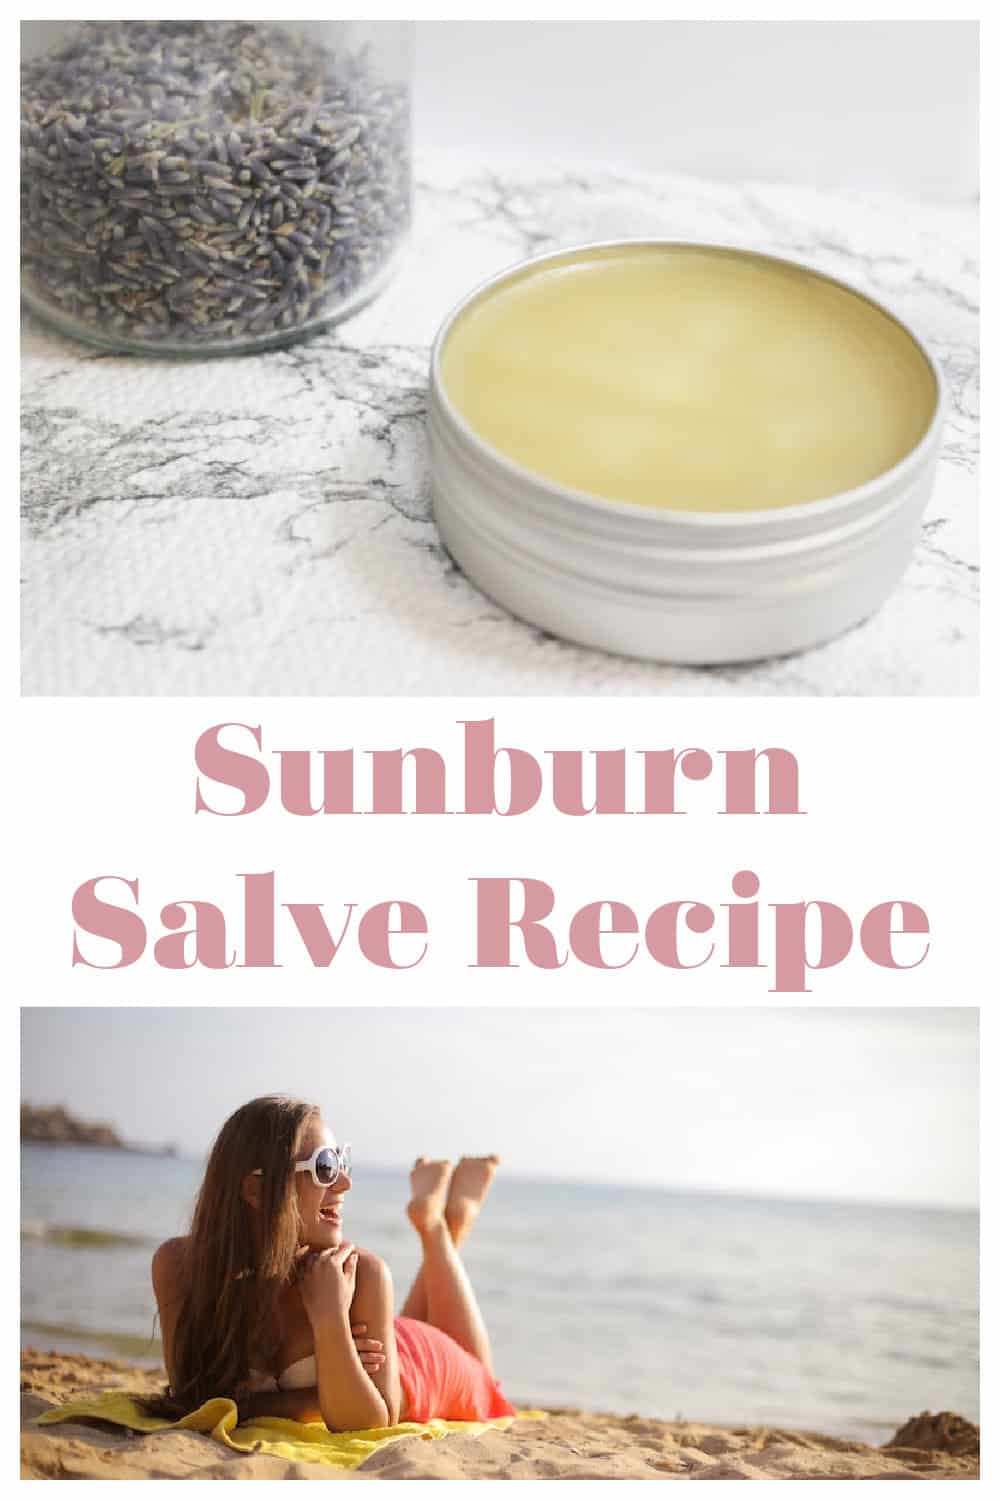 Make this beeswax sunburn salve recipe to soothe sunburnt skin. Learn how to make my easy lavender salve recipe the next time you get too much sun.